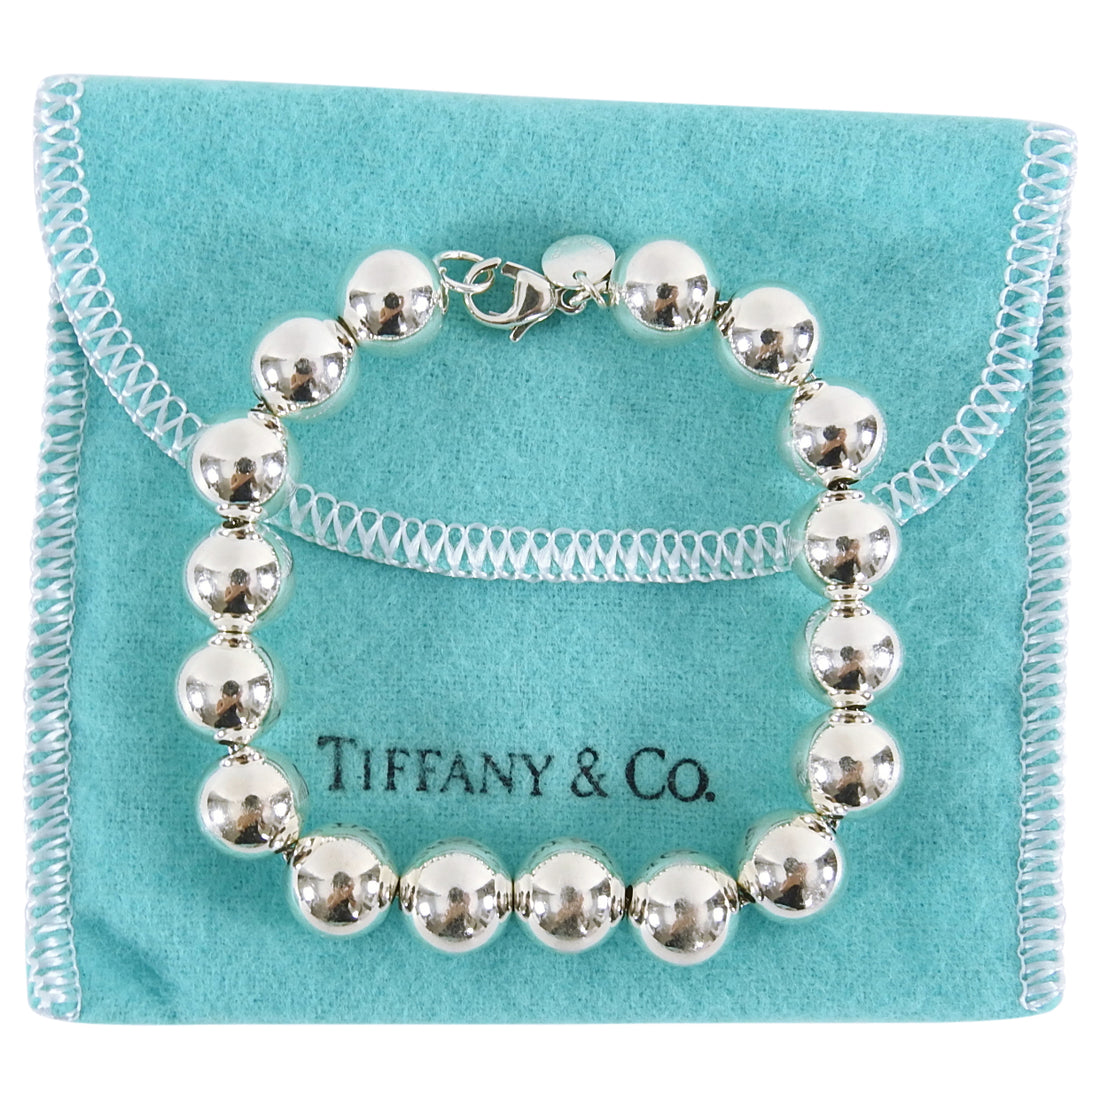 Tiffany and Co Sterling Silver 10mm Ball Bracelet – I MISS YOU VINTAGE